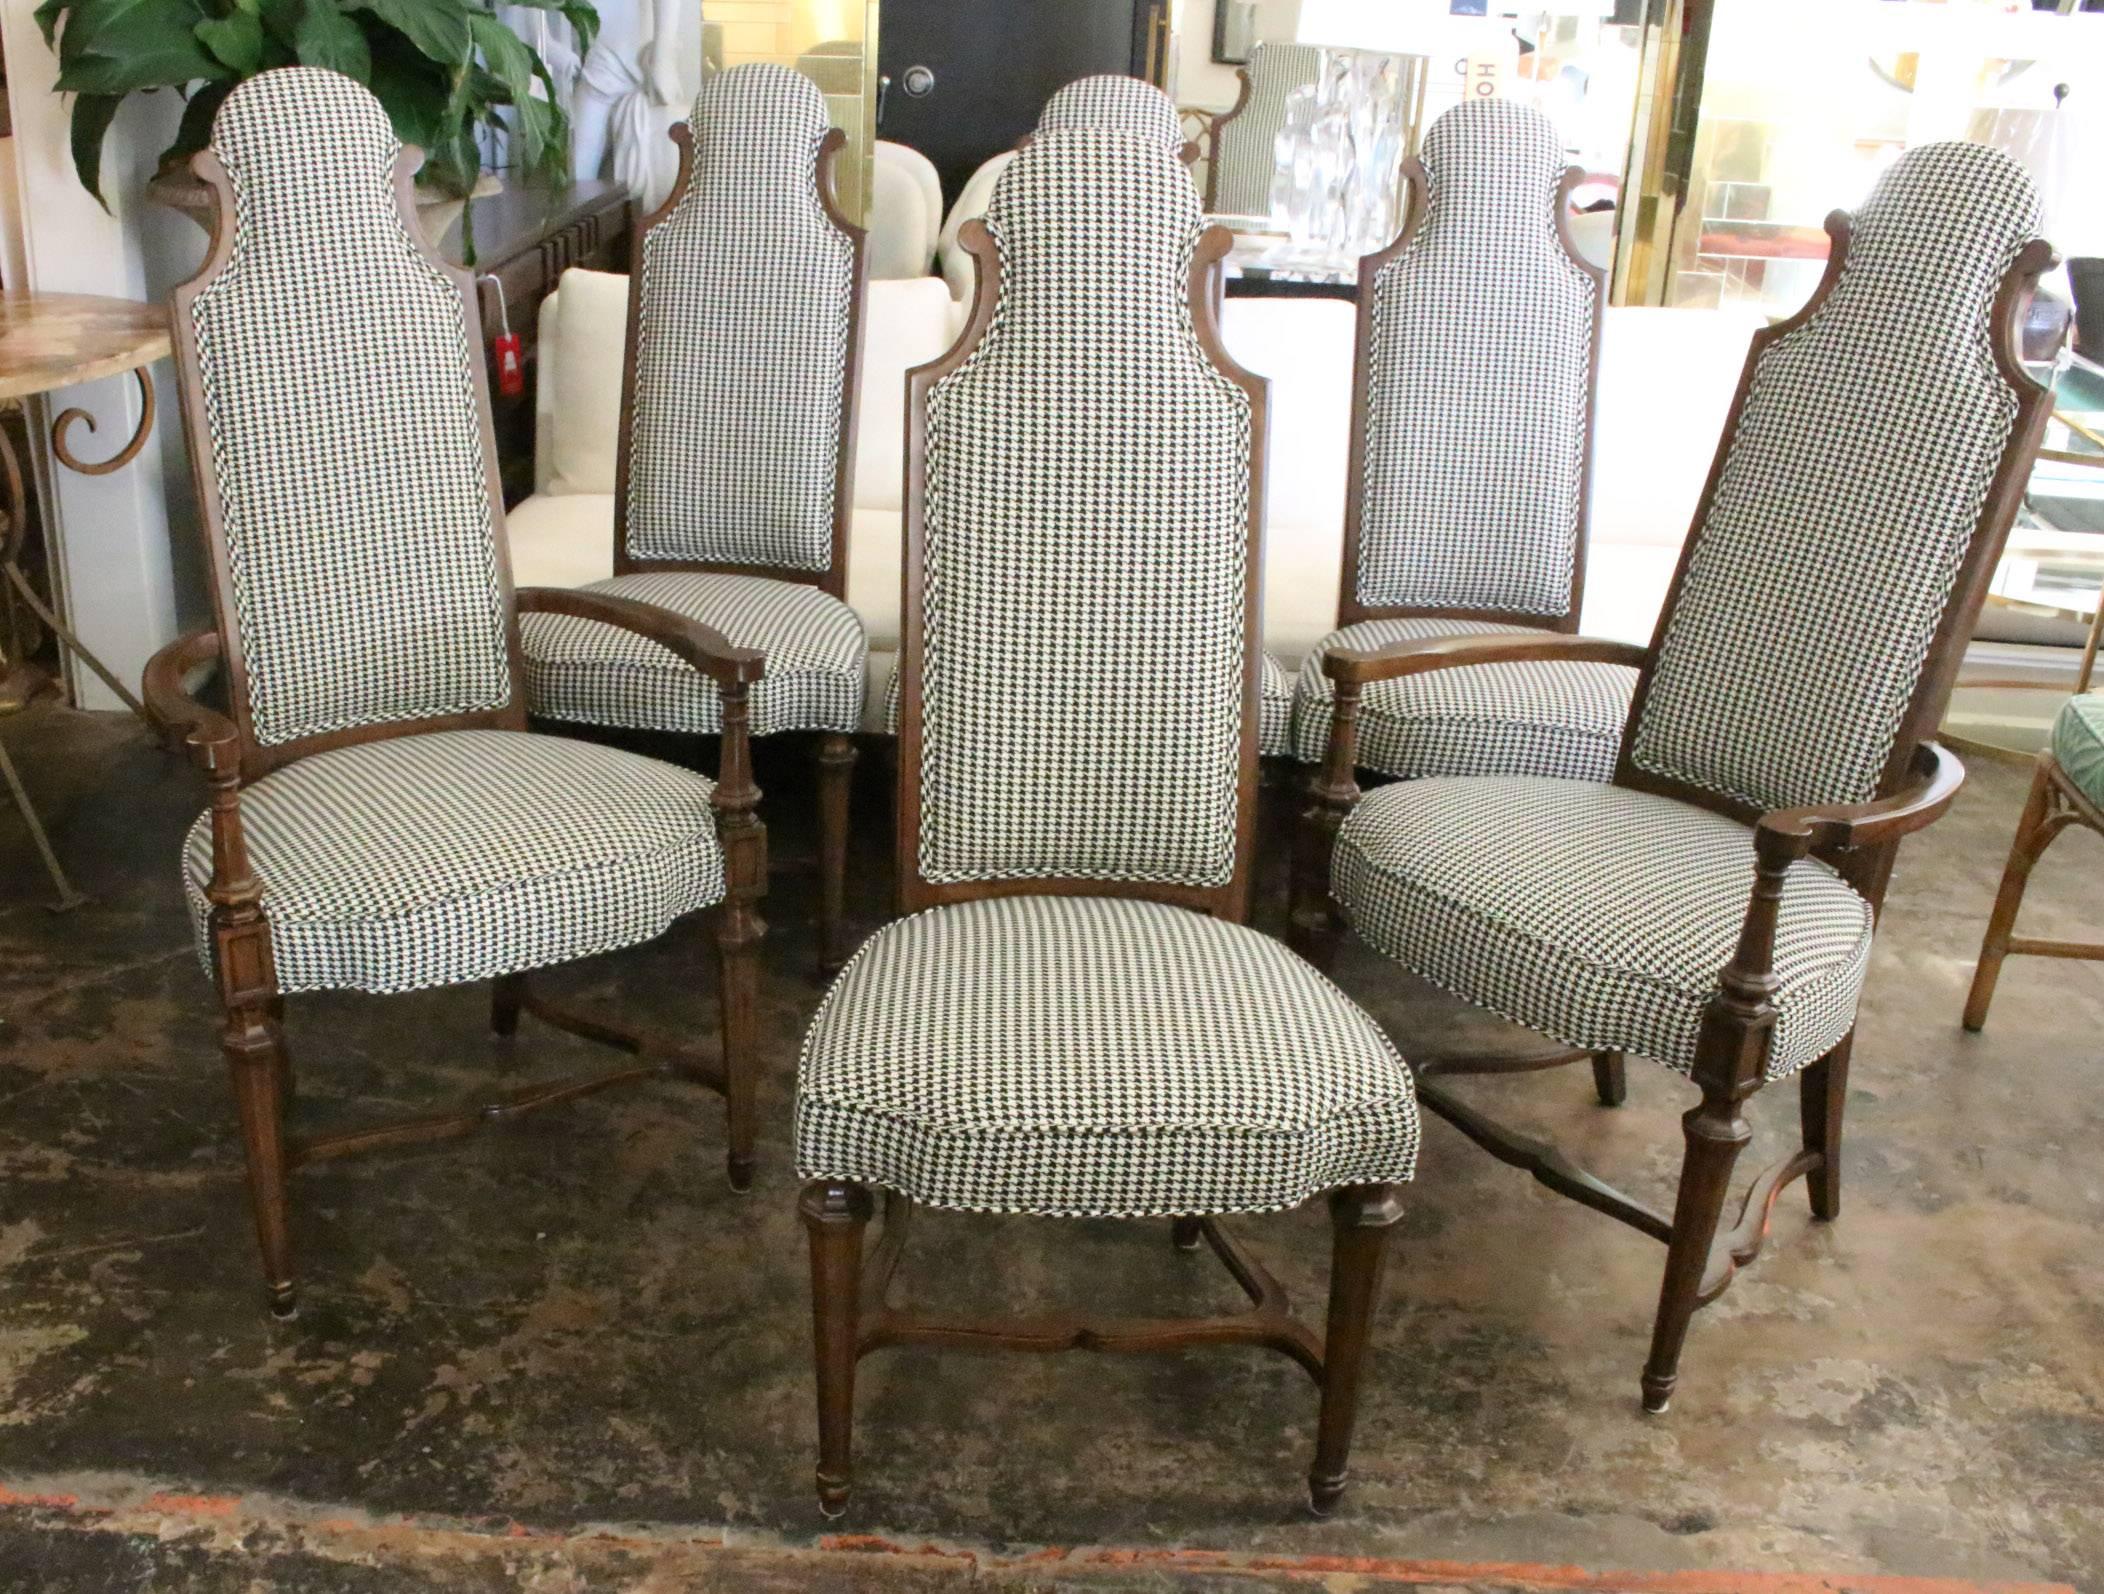 Set of six high back Regency dining chairs. Upholstered in a handsome black and white houndstooth.

Dimensions: 23.5